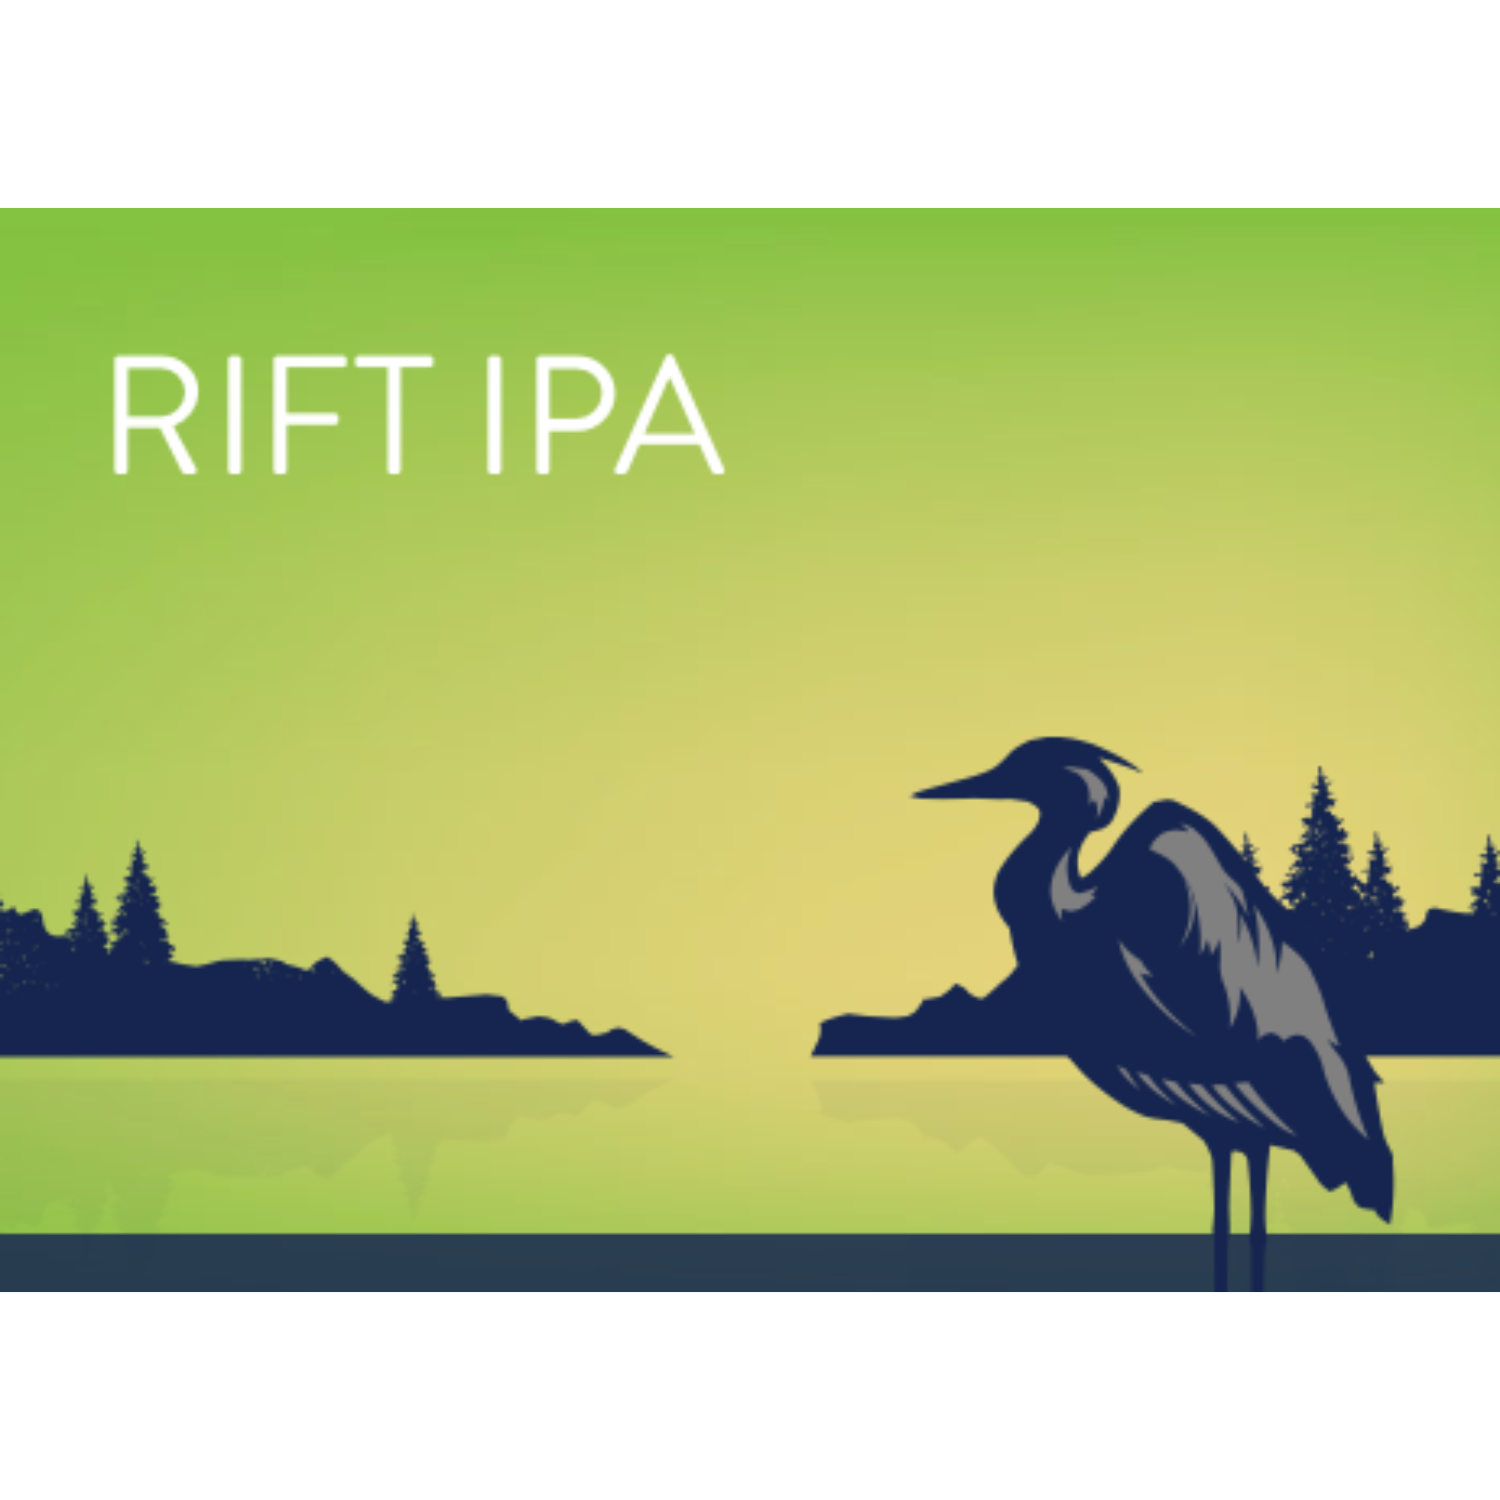 Central Waters - Rift IPA